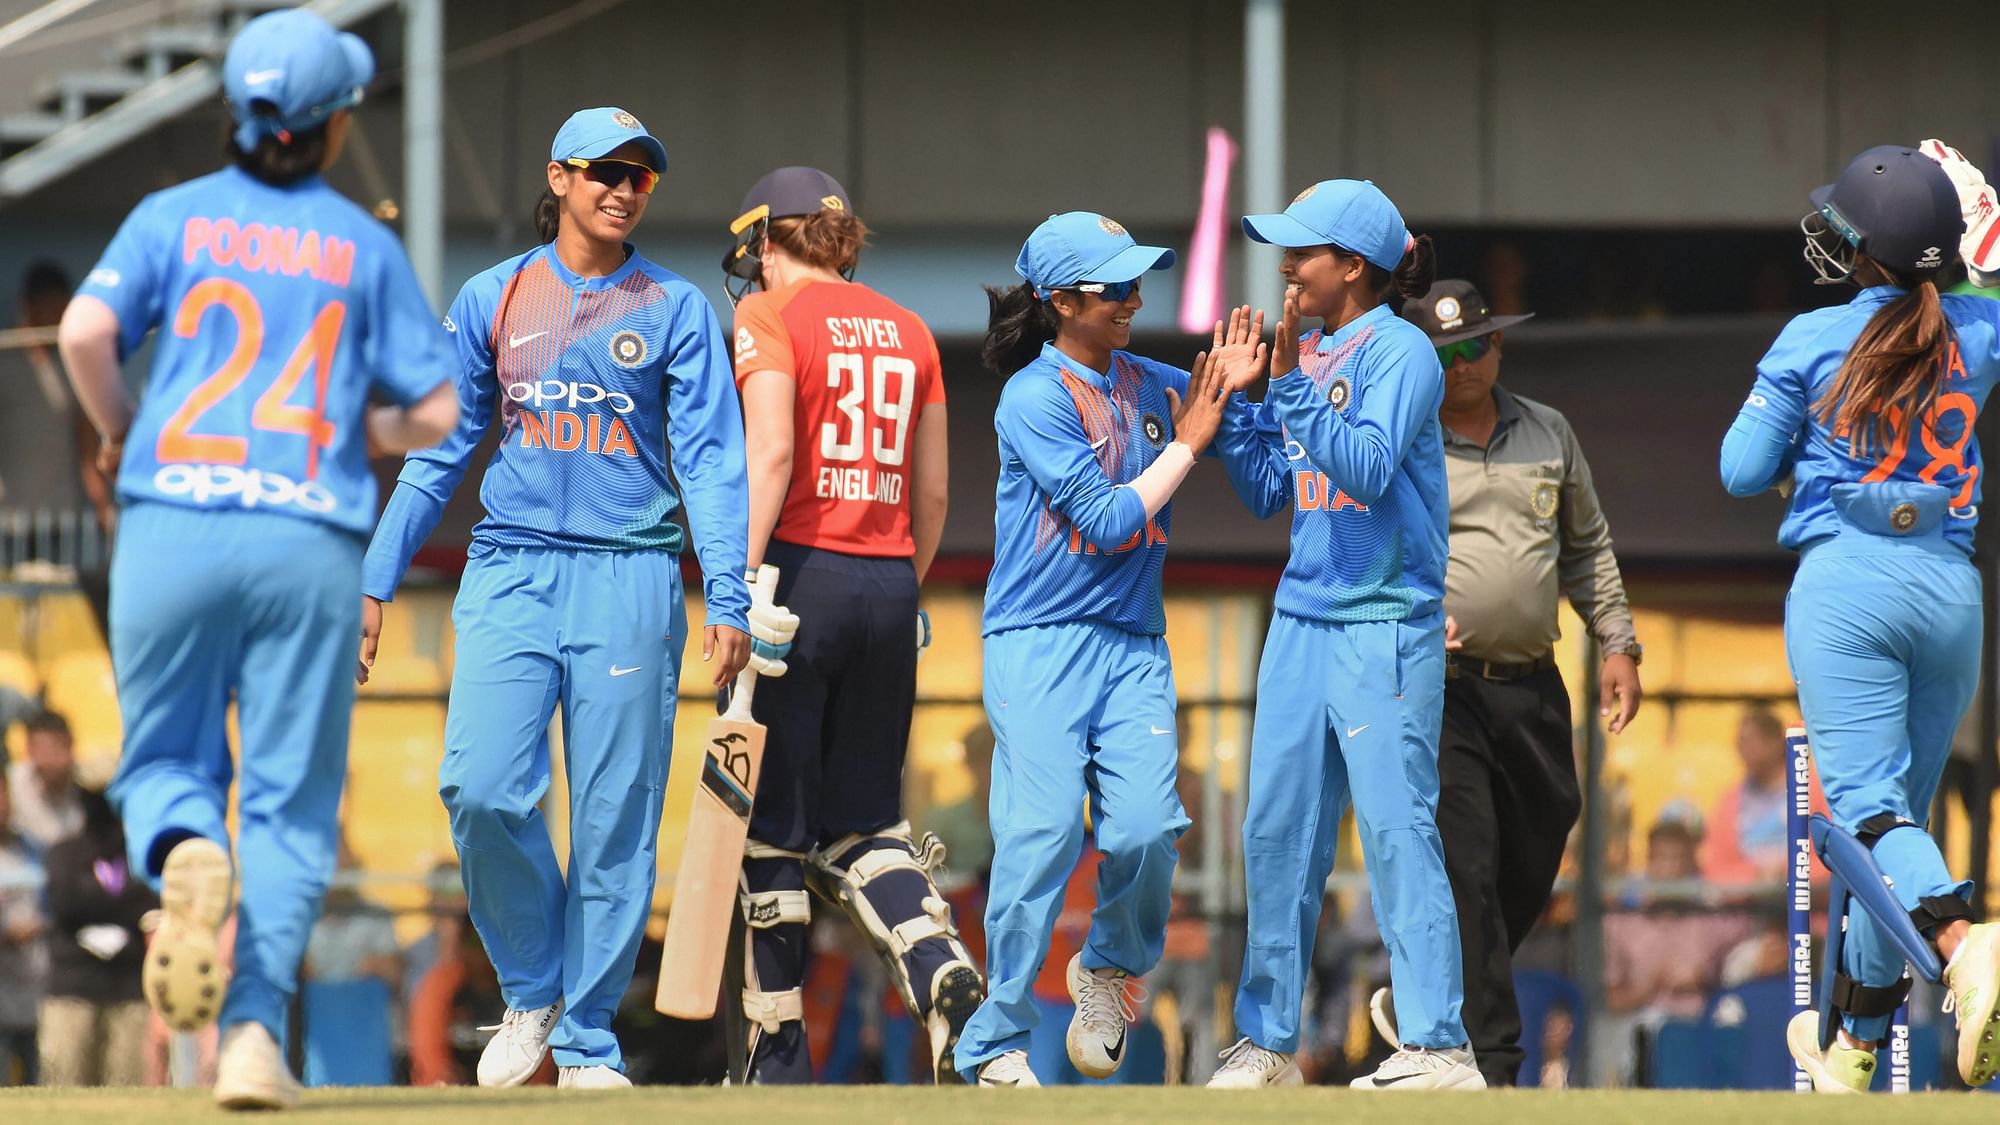 After winning the ODI series 2-1, India lost momentum and subsequently conceded an unassailable 2-0 lead vs England.